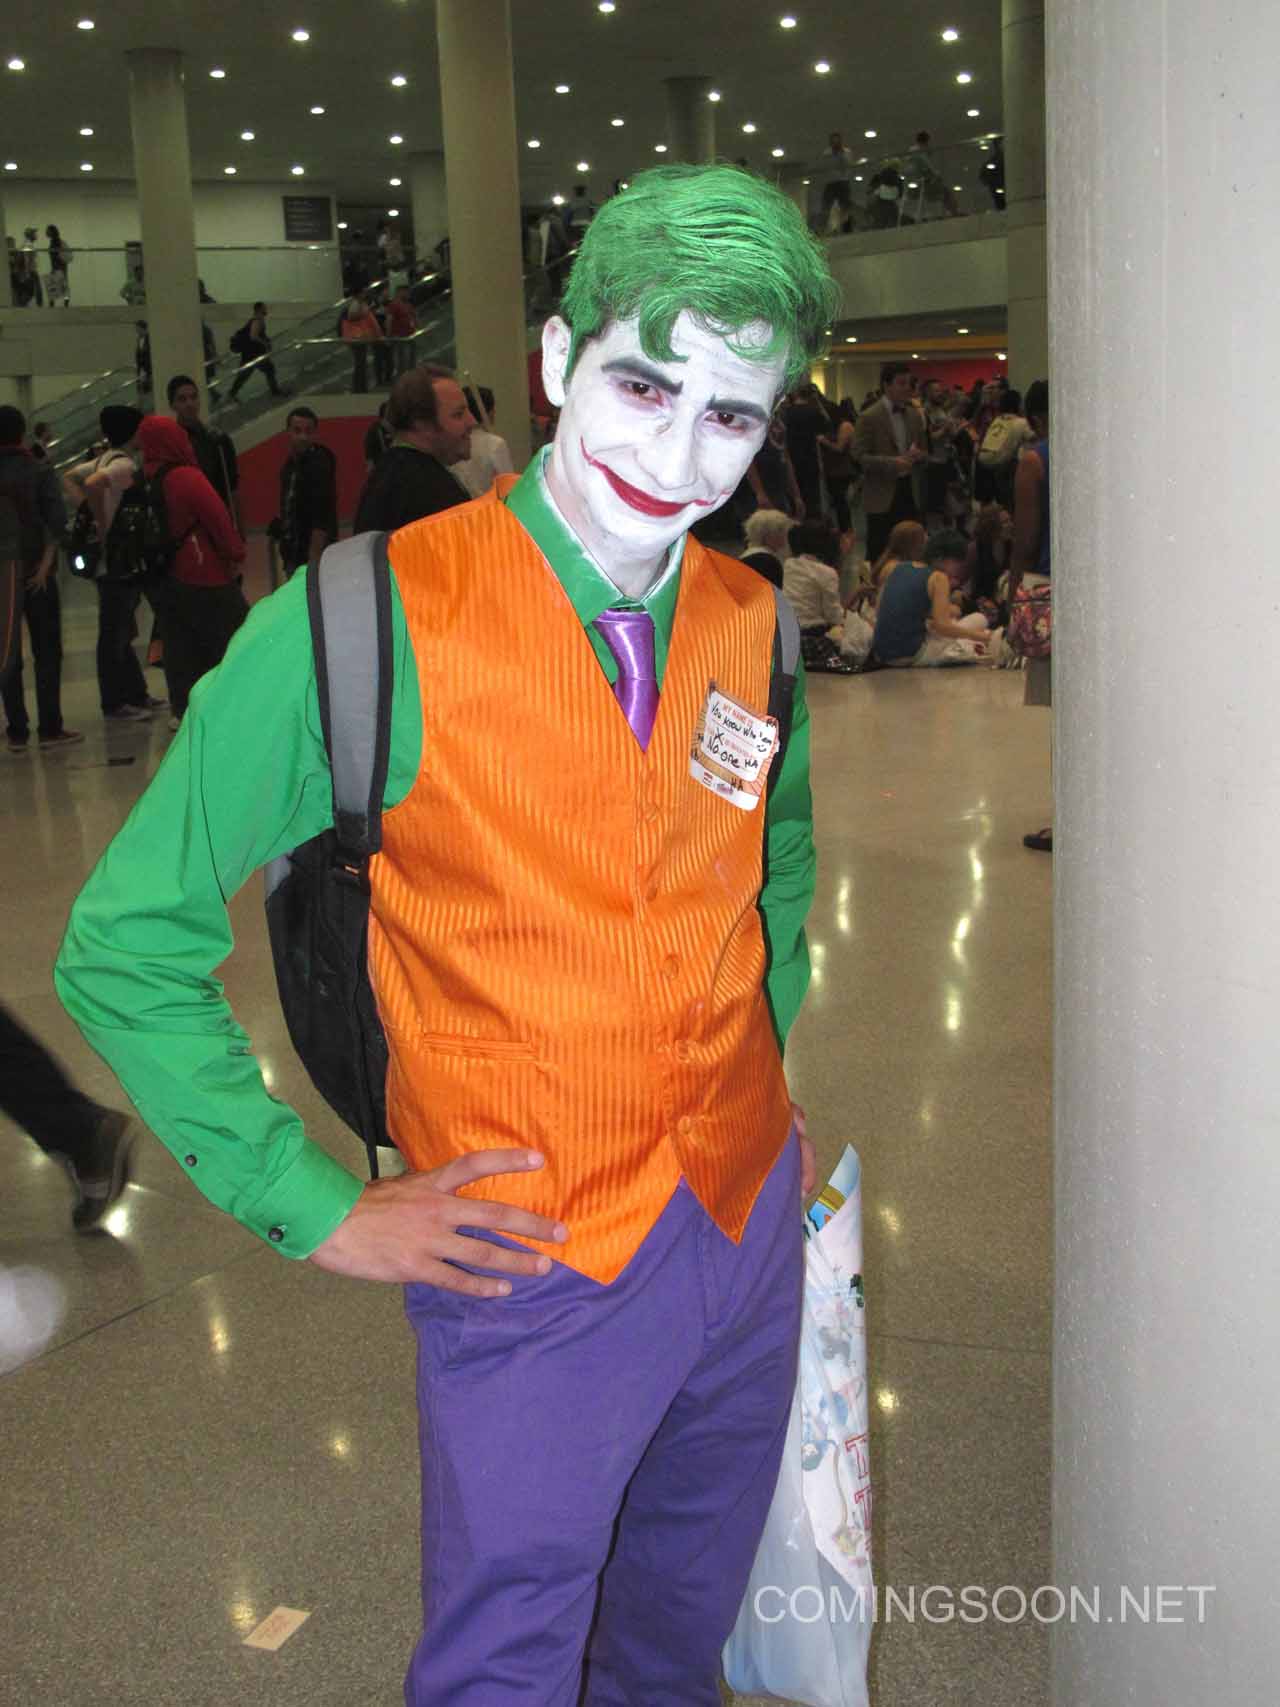 New Cosplay Photos from Day 2 of the New York Comic Con - SuperHeroHype